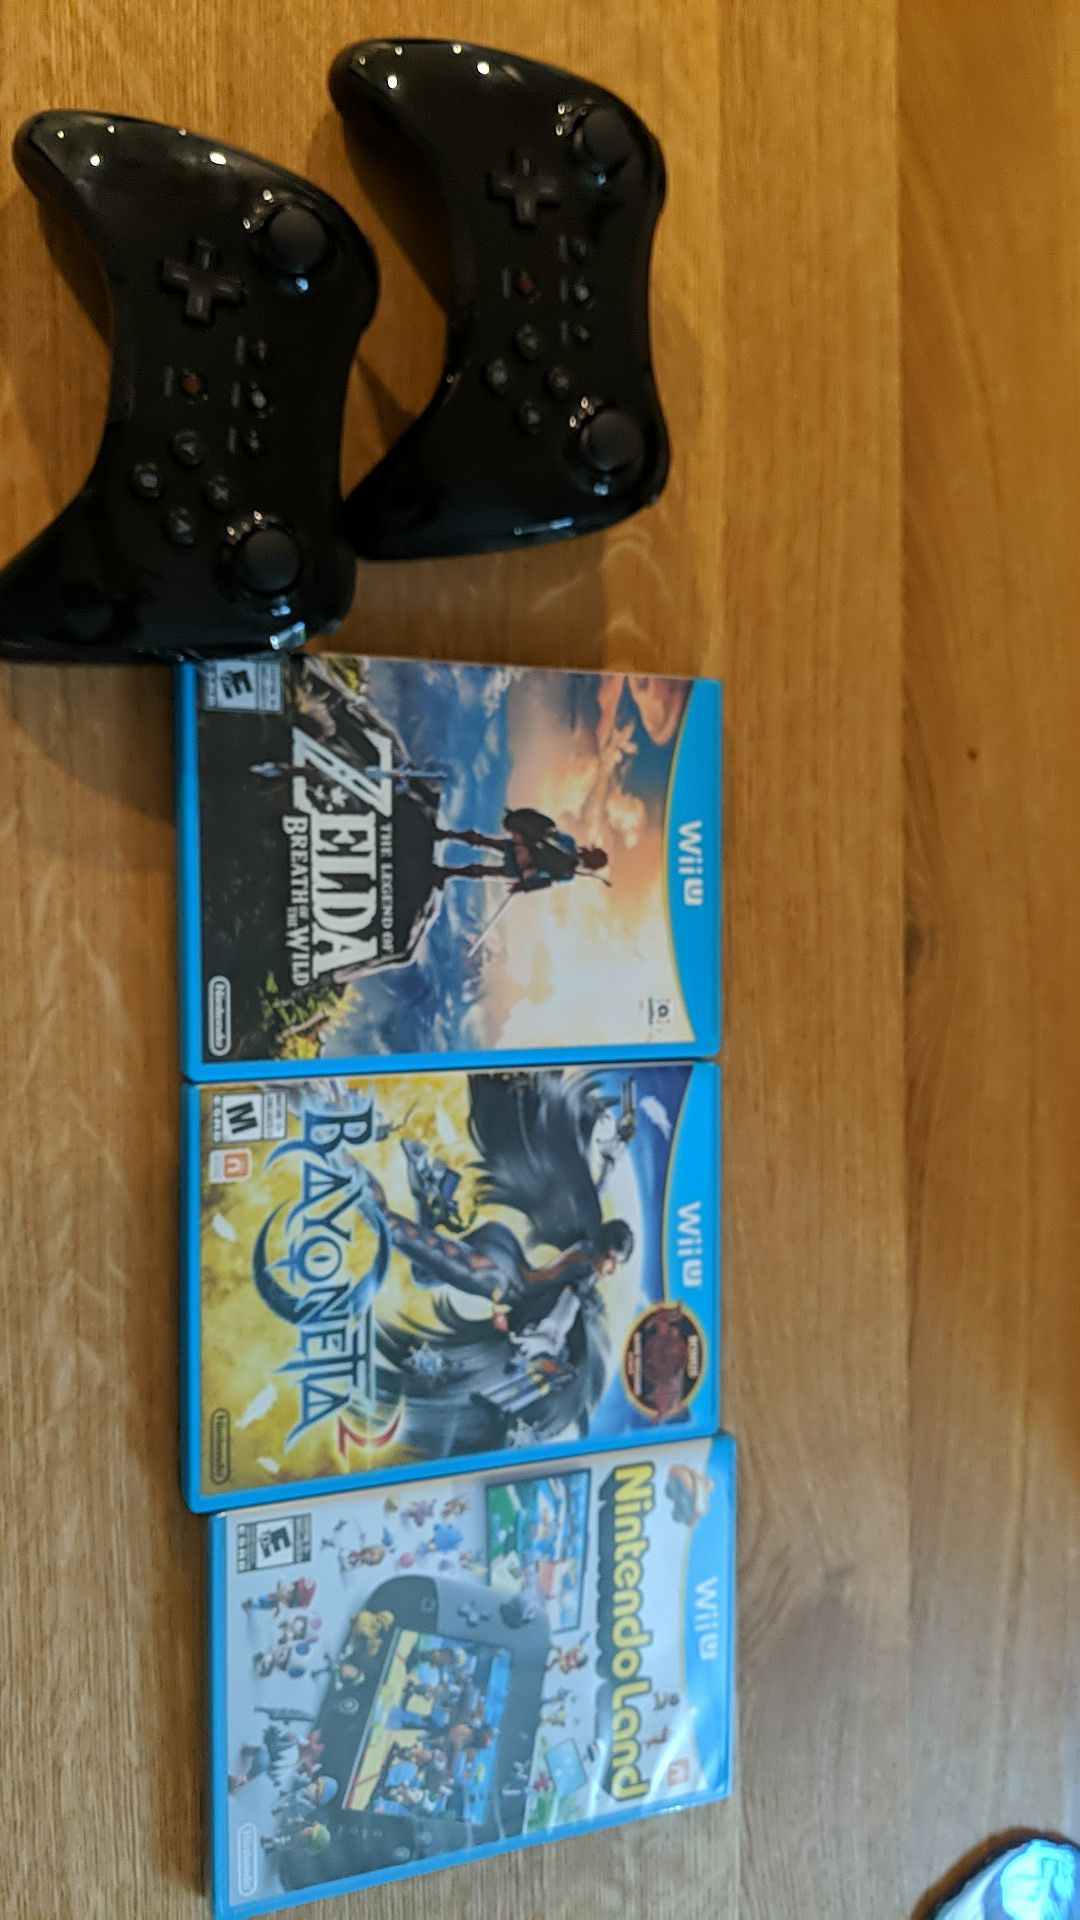 Wii U Controllers and some of the best Wii U games